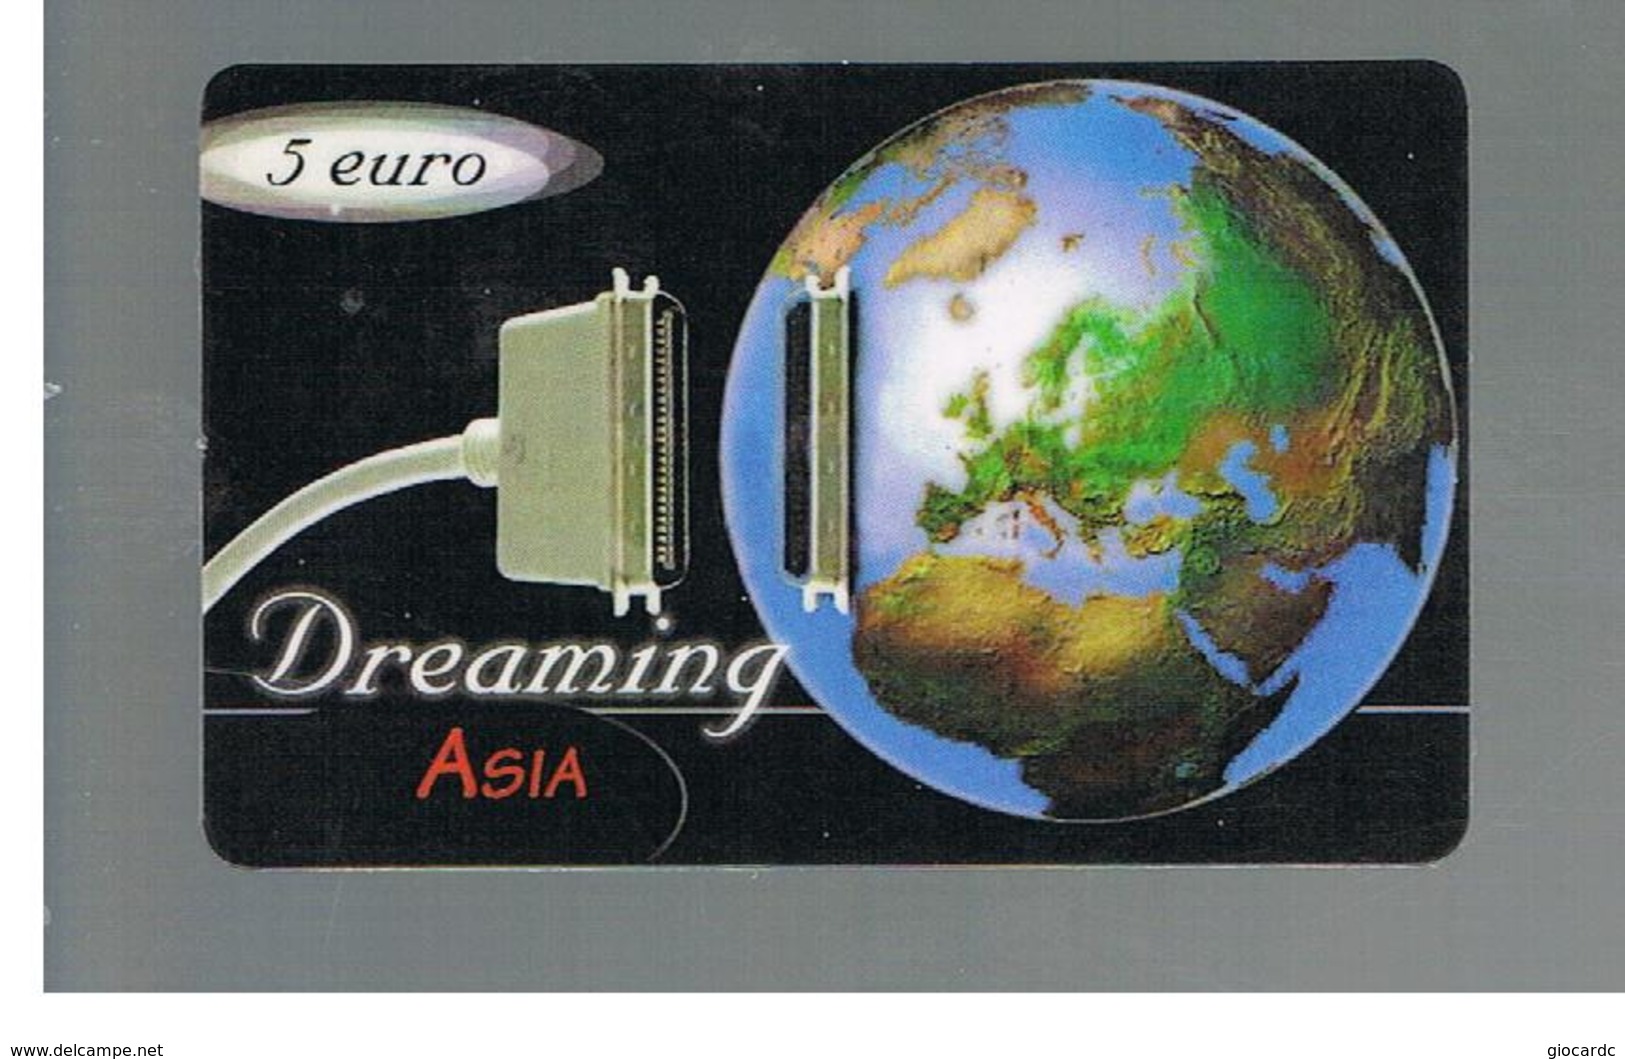 ITALIA (ITALY) - REMOTE -  DREAMING  ASIA  -   GLOBE       - USED - RIF. 10940 - Cartes GSM Prépayées & Recharges